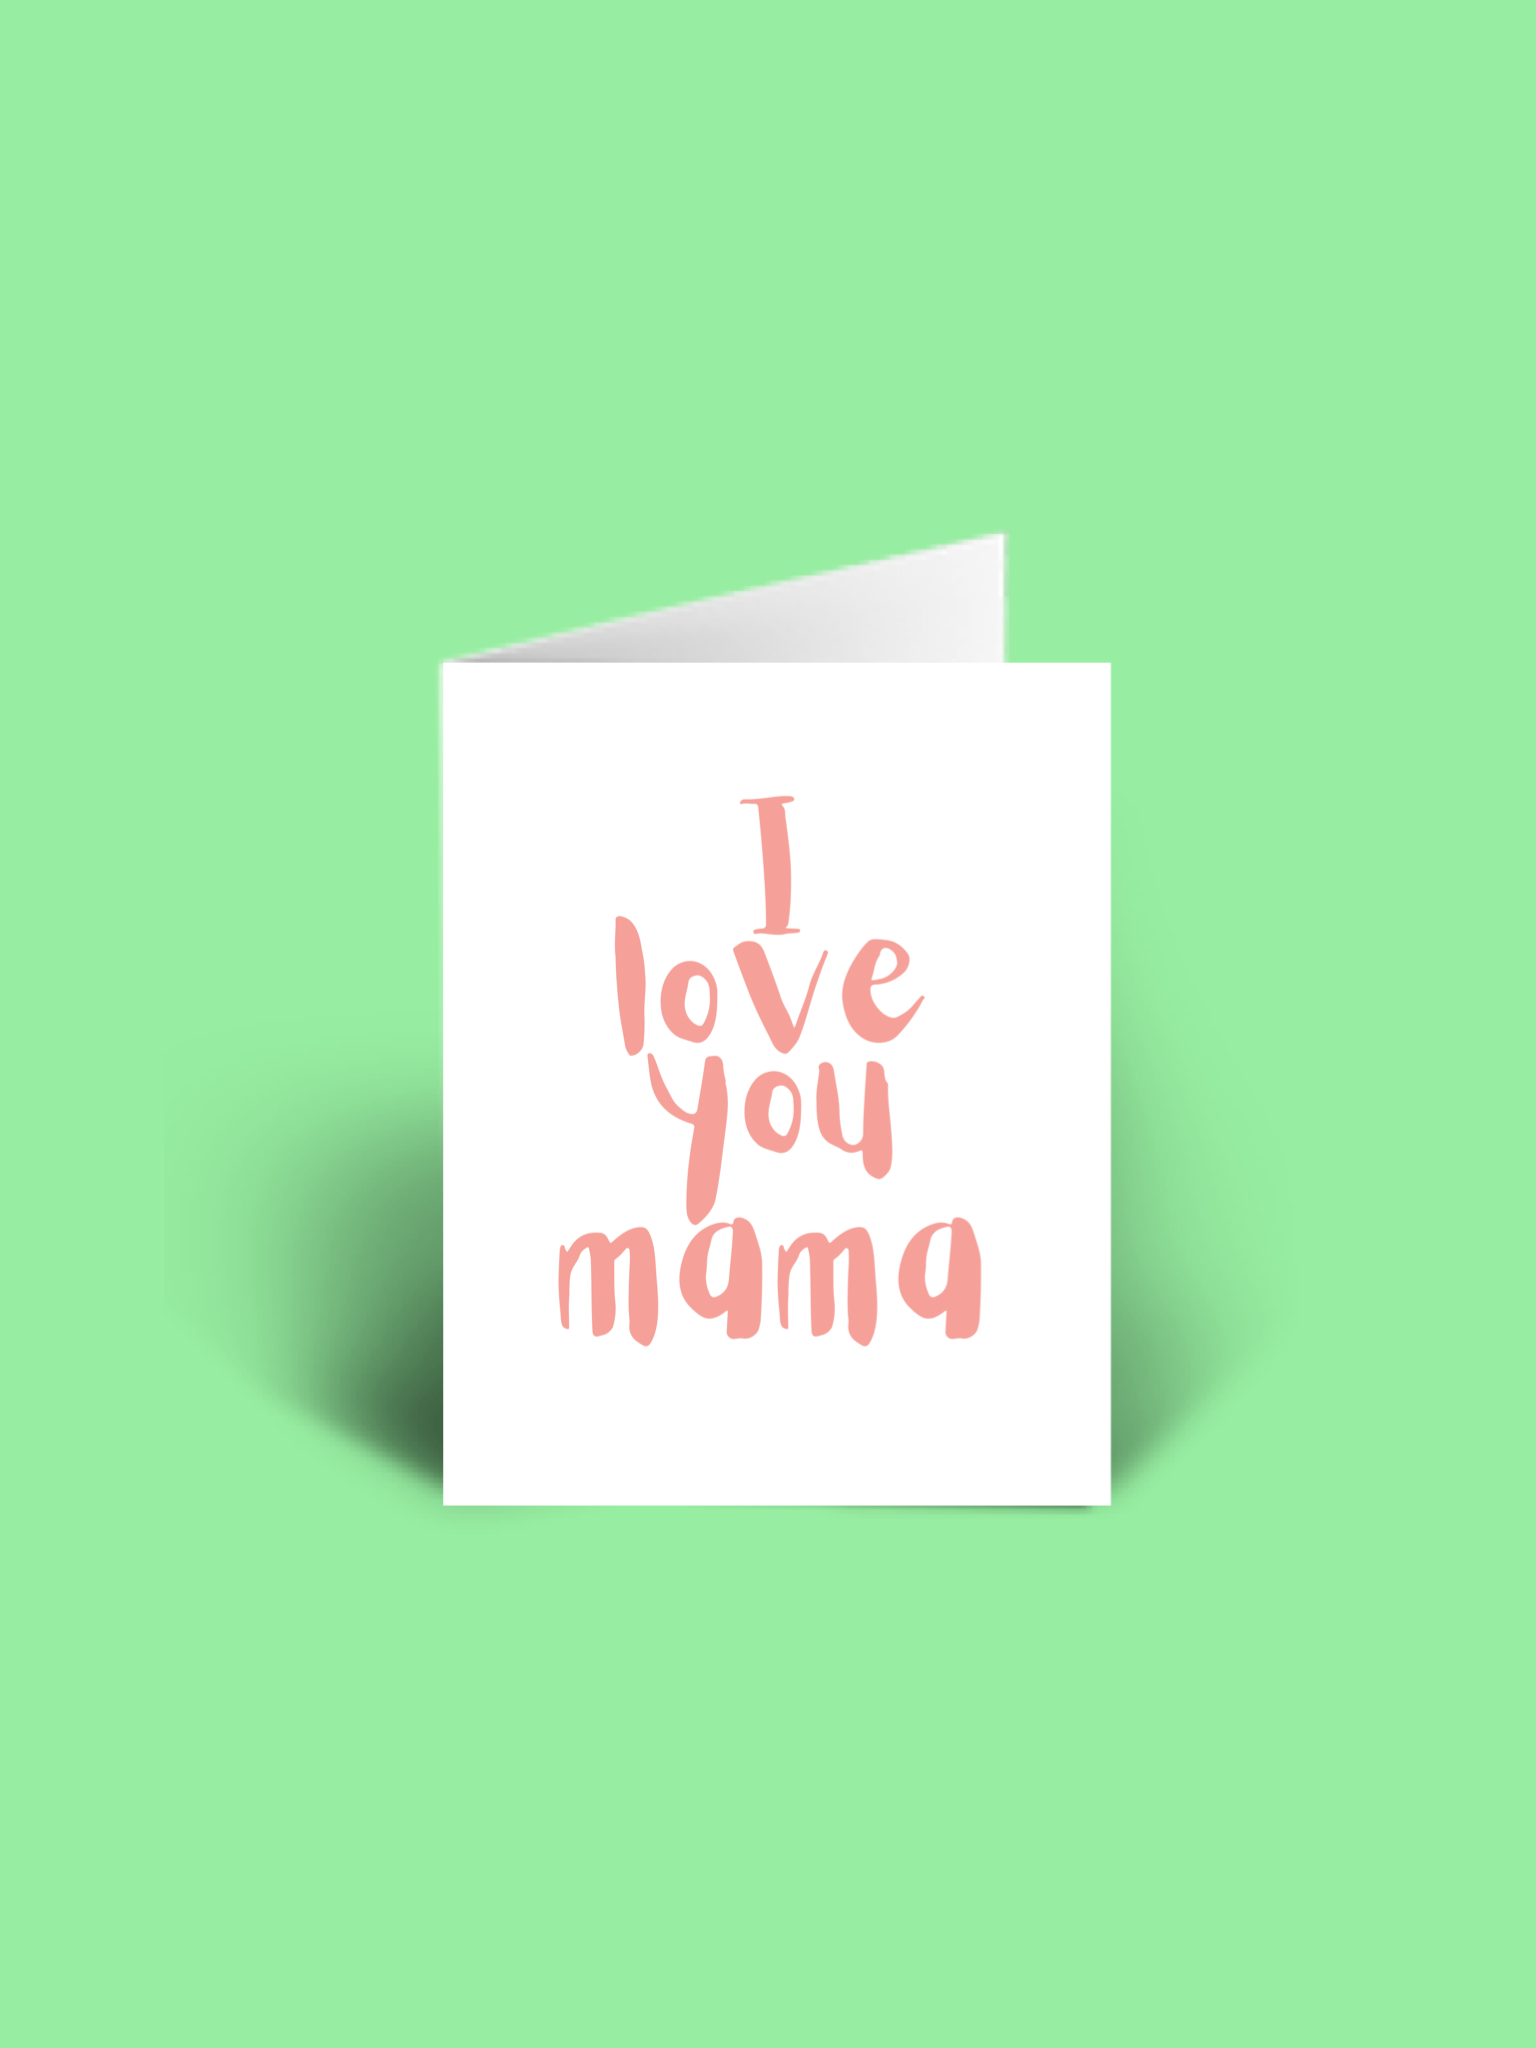 I love you A6 Mother’s Day Card blank inside.